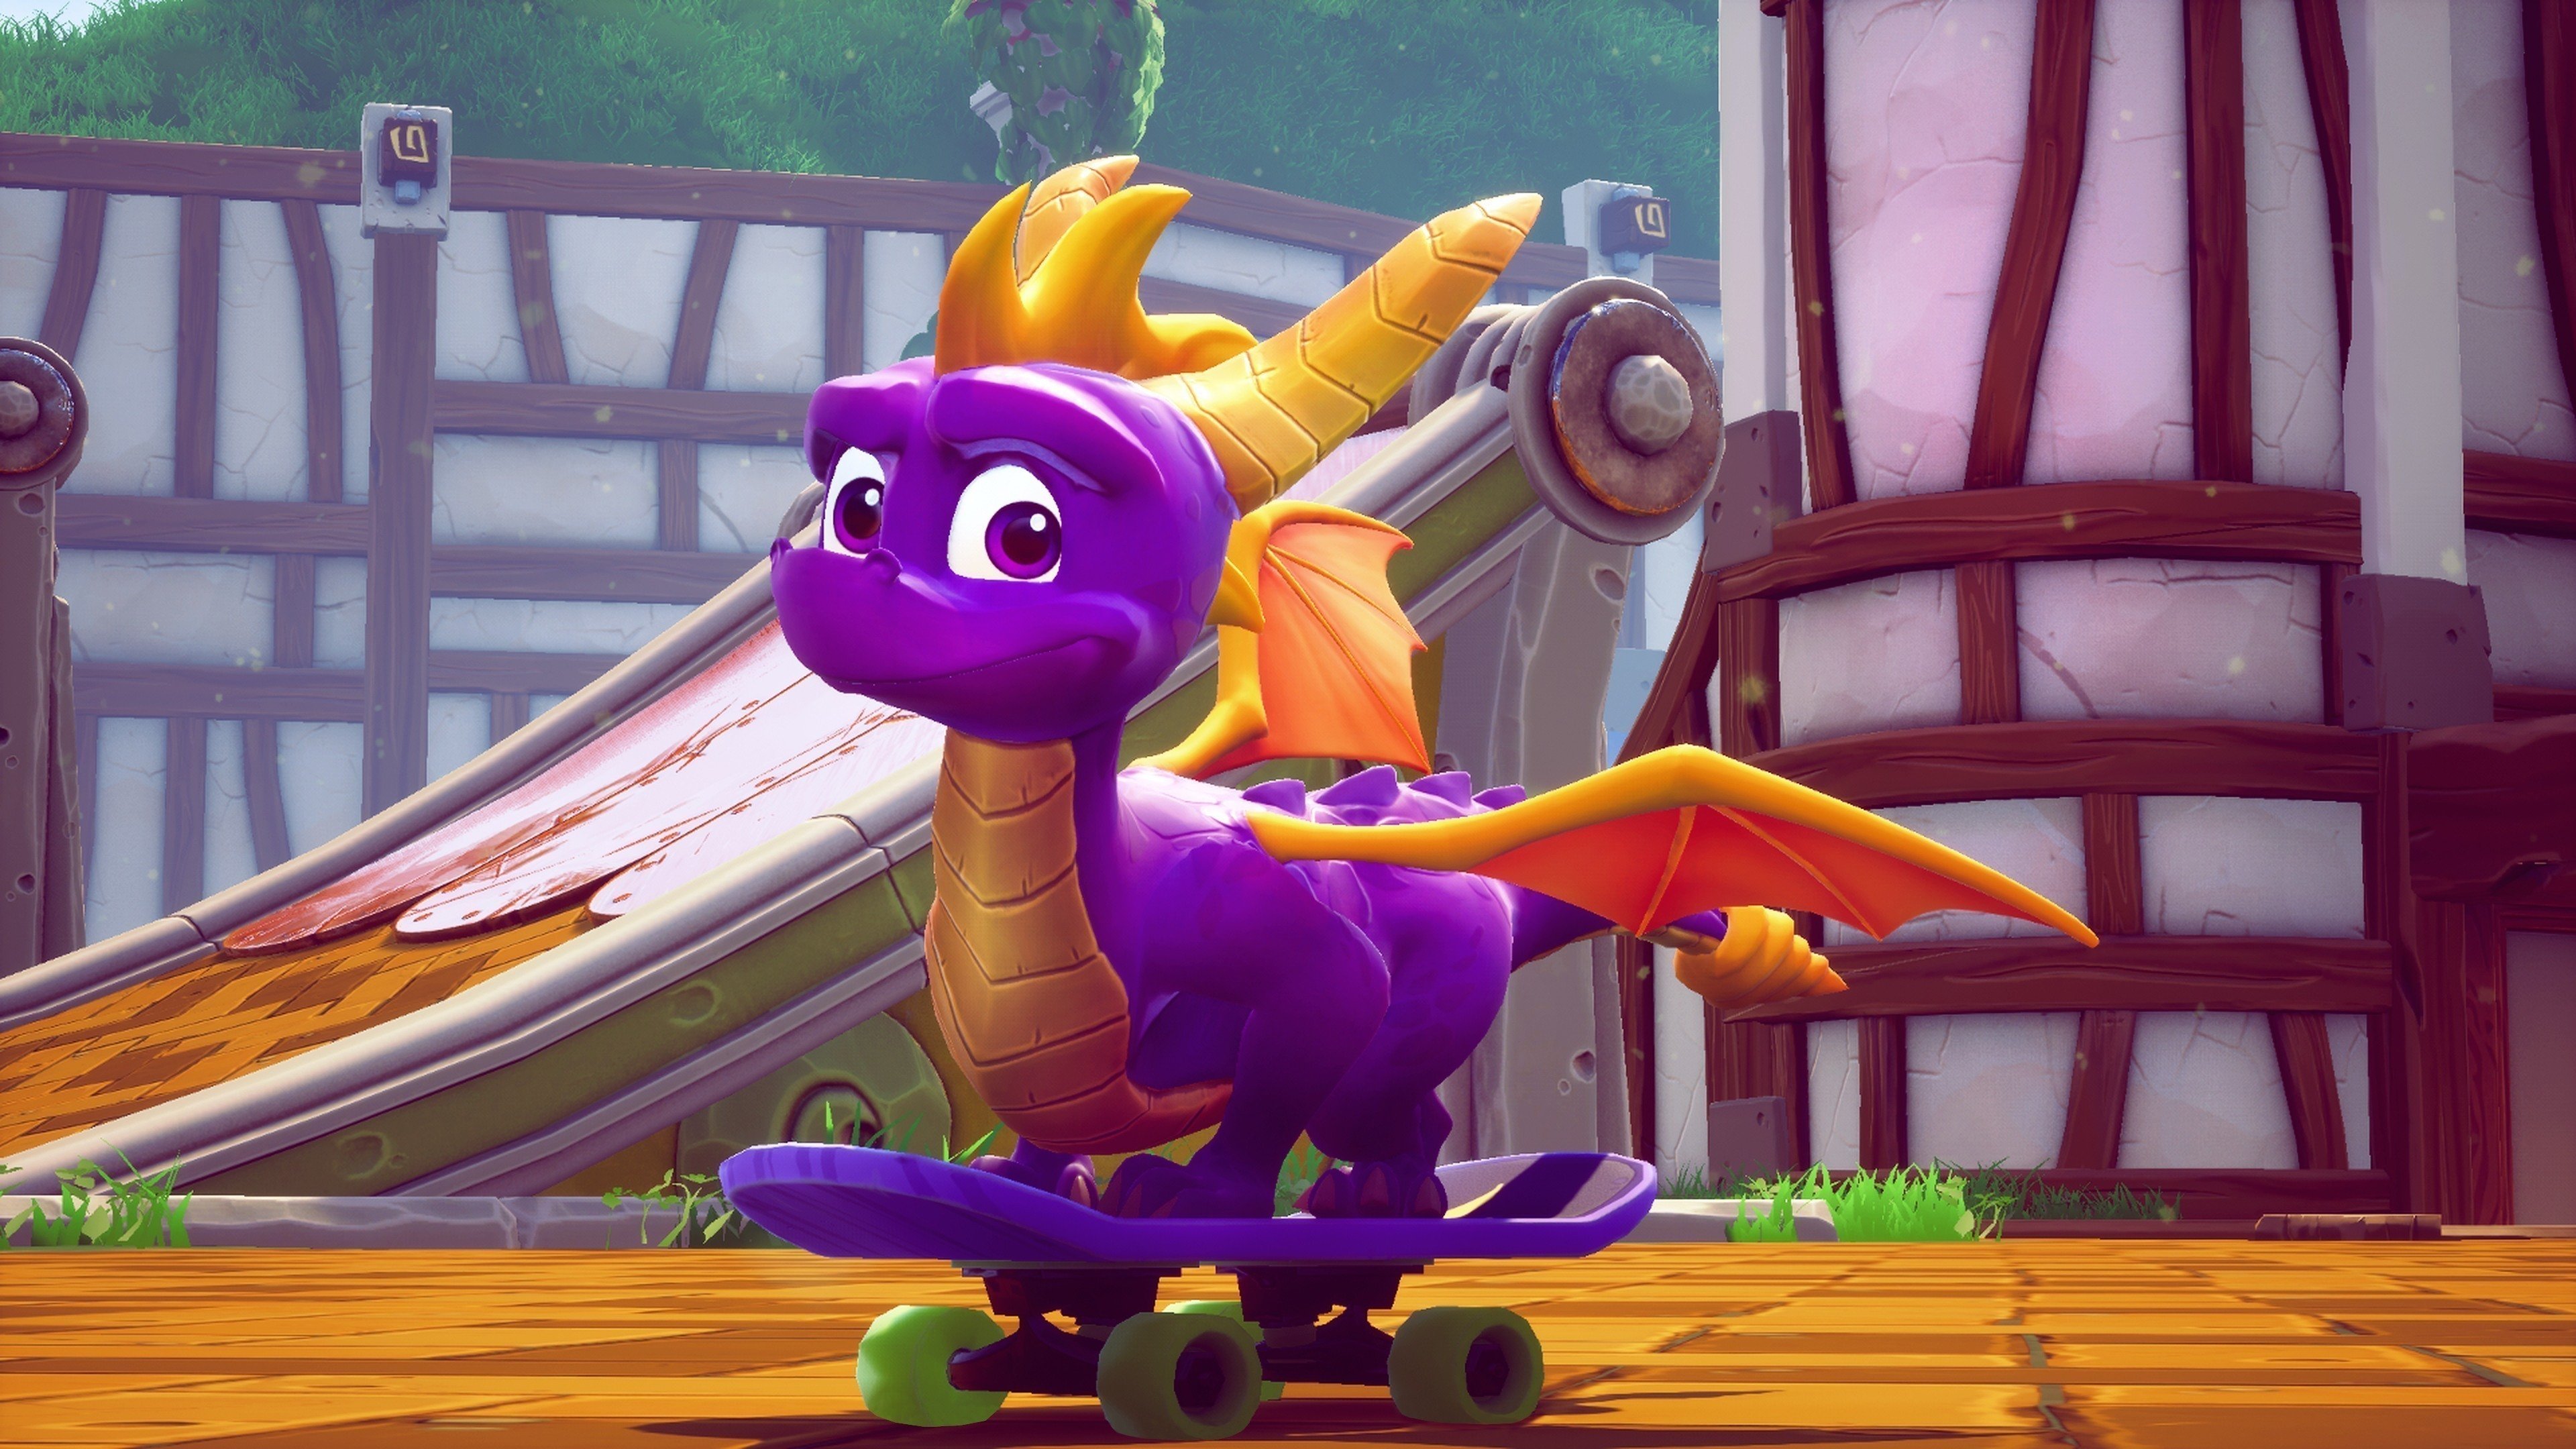 Sunny Villa in the remastered Spyro: Year of the Dragon, included in the Spyro Reignited Trilogy package.